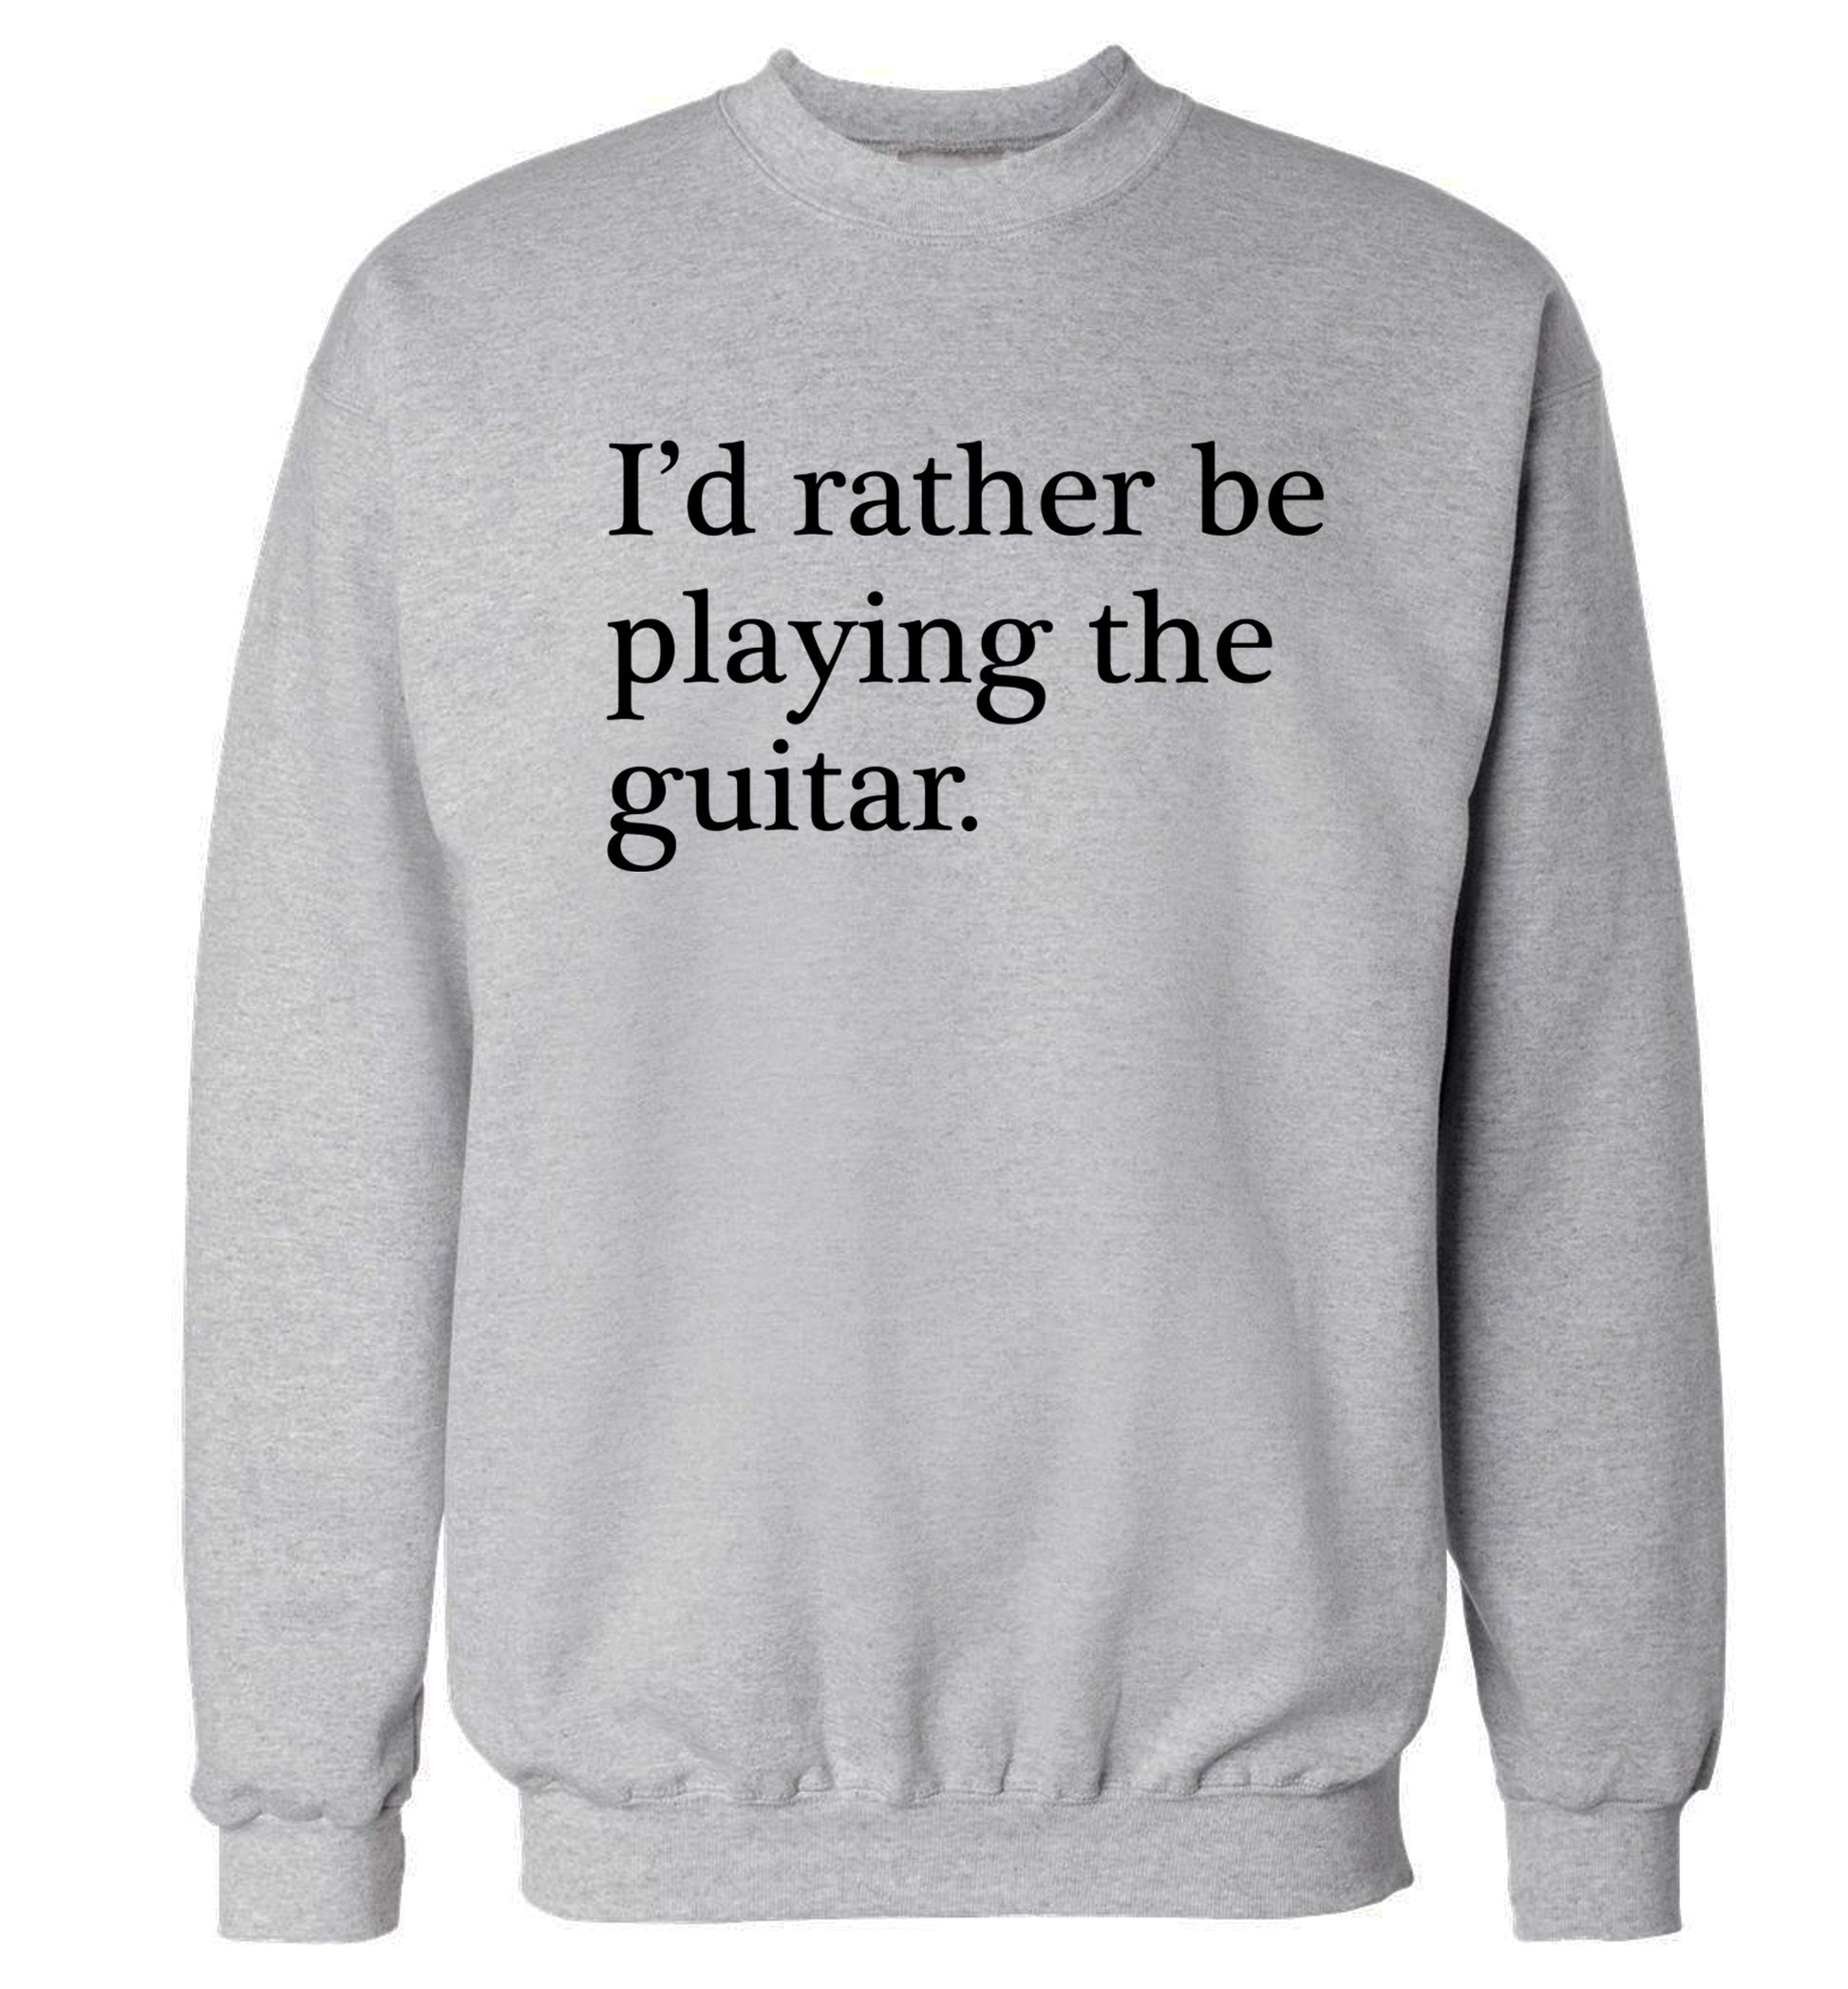 I'd rather be playing the guitar Adult's unisex grey Sweater 2XL